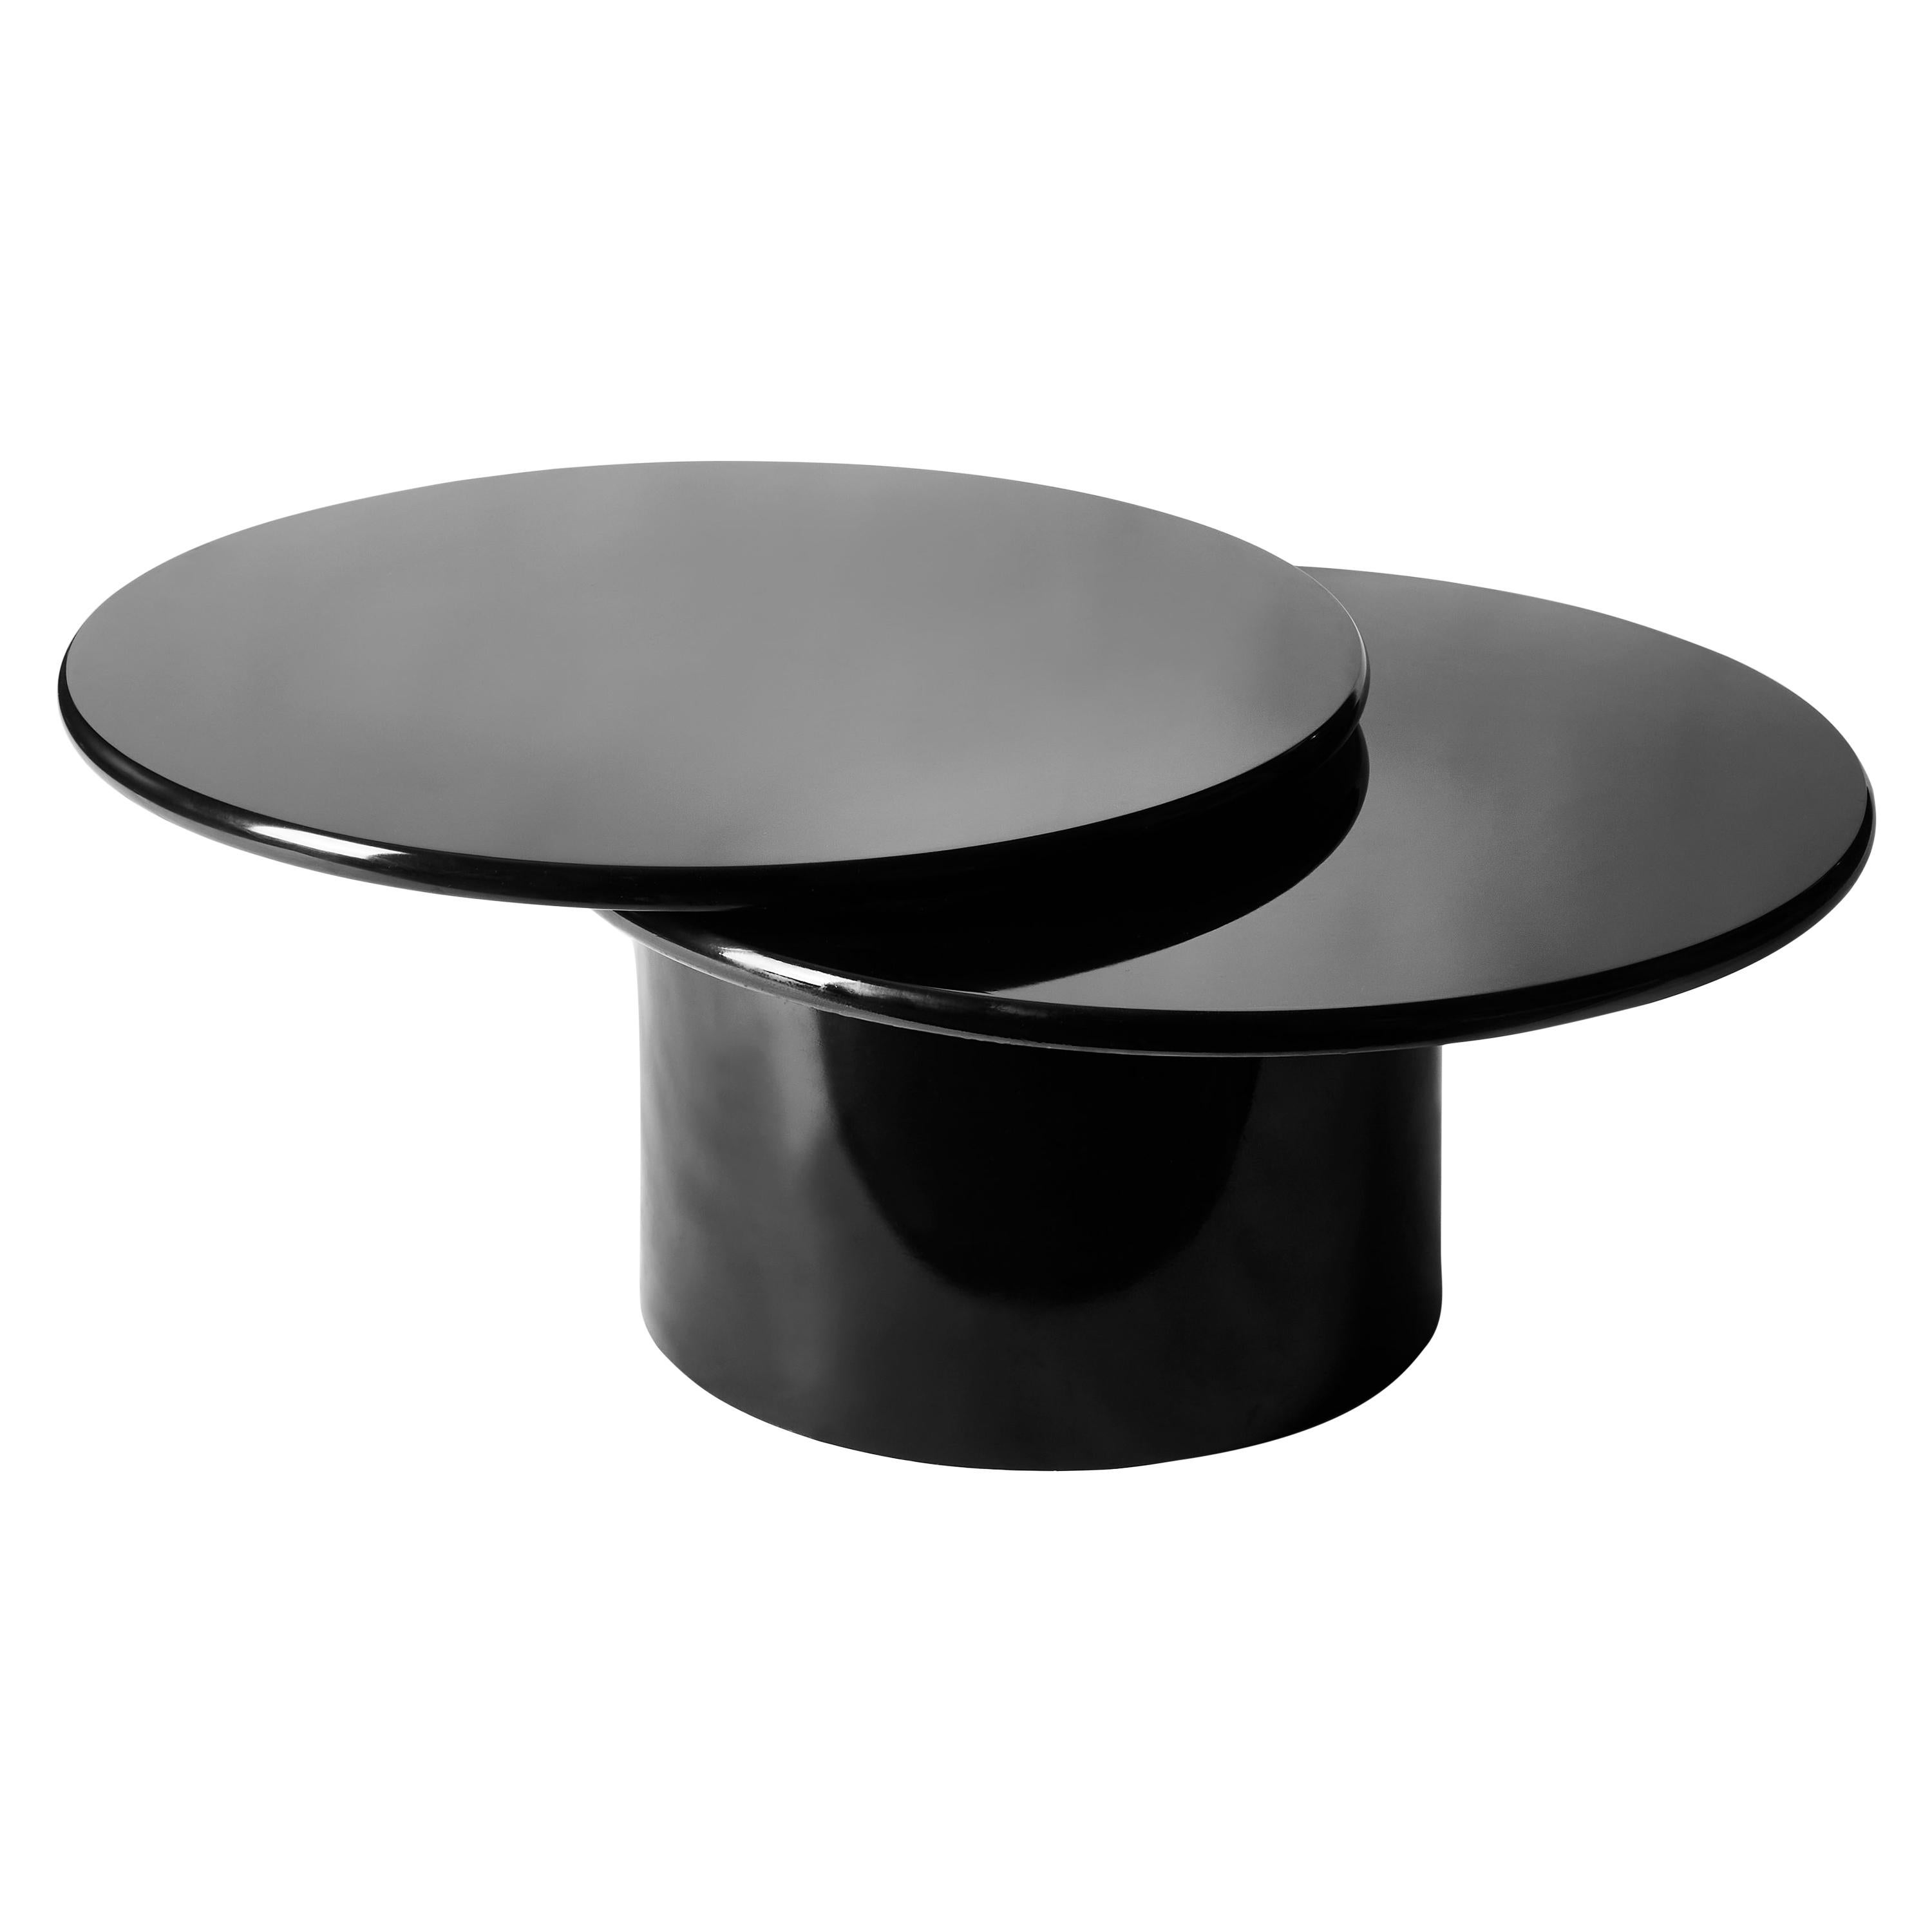 Swiveling Coffee Table at Cost Price